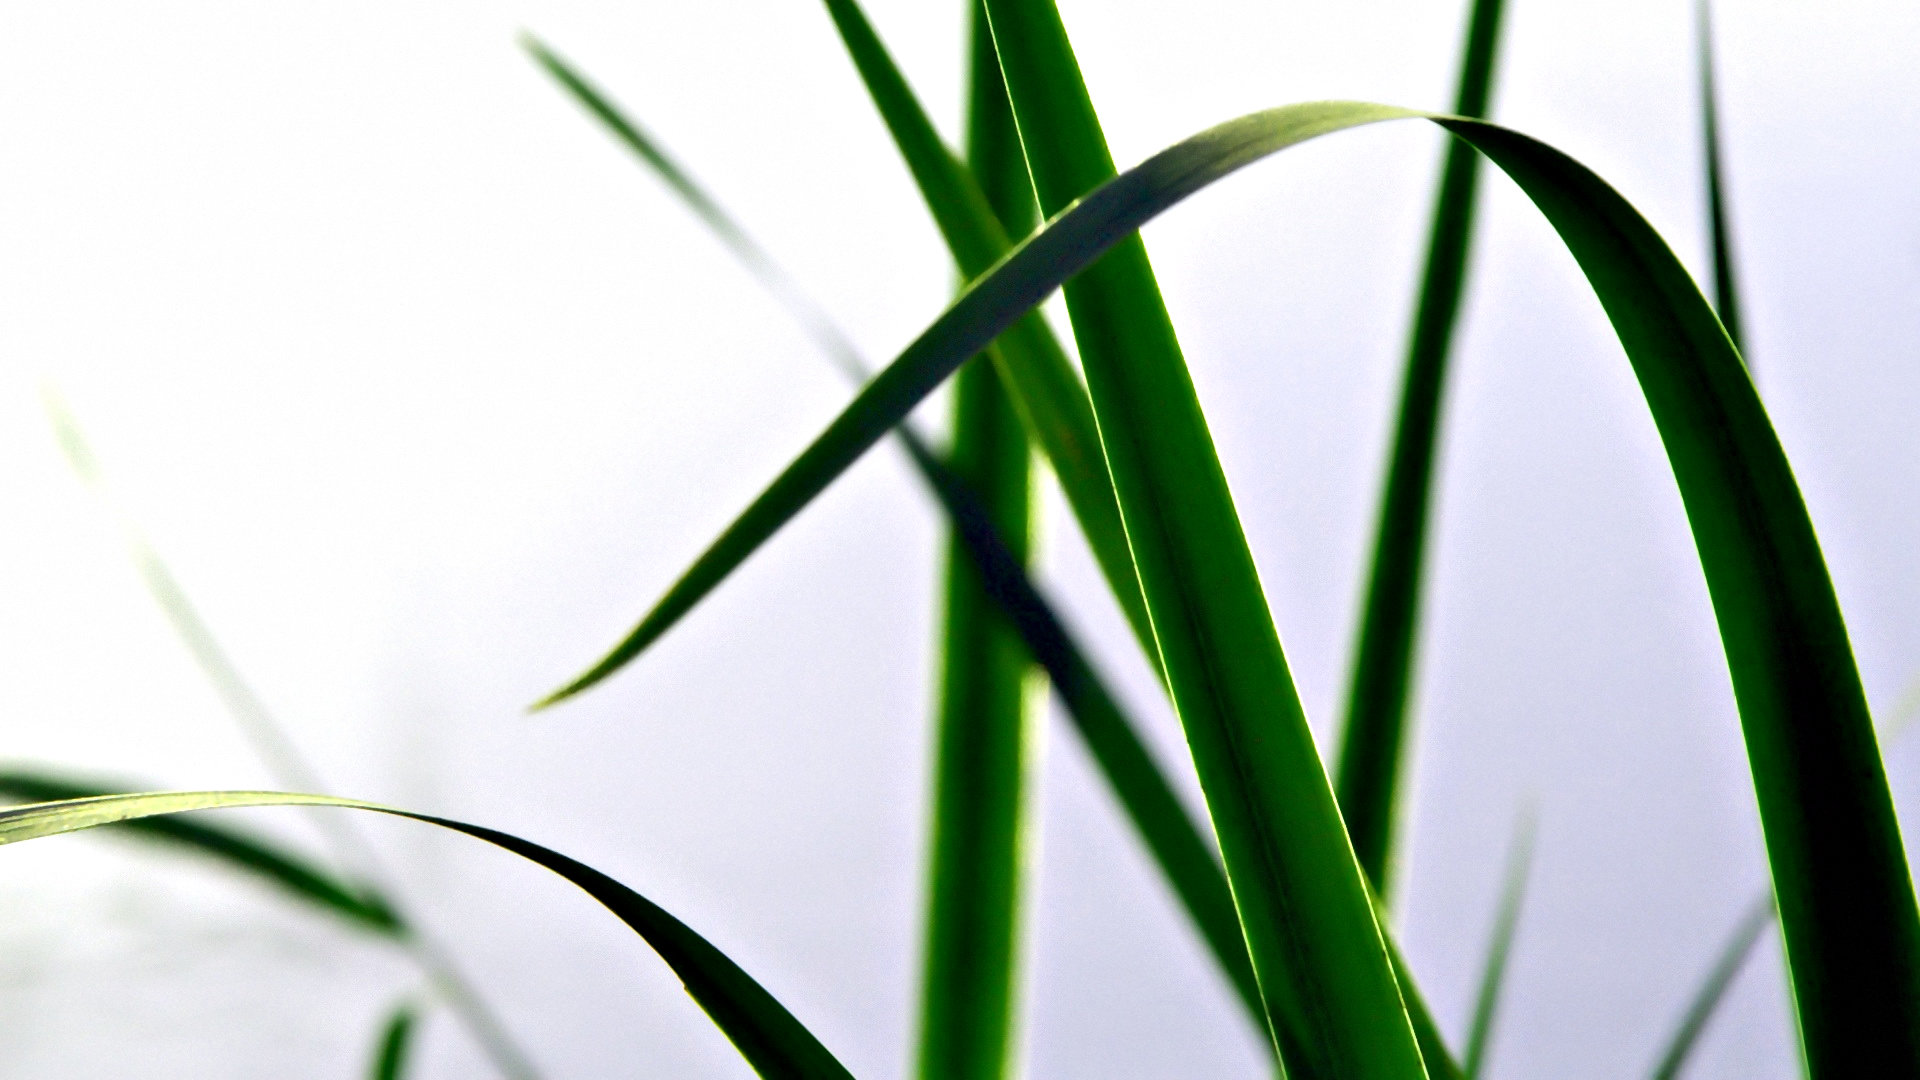 Download 1080p Grass desktop background ID:377727 for free